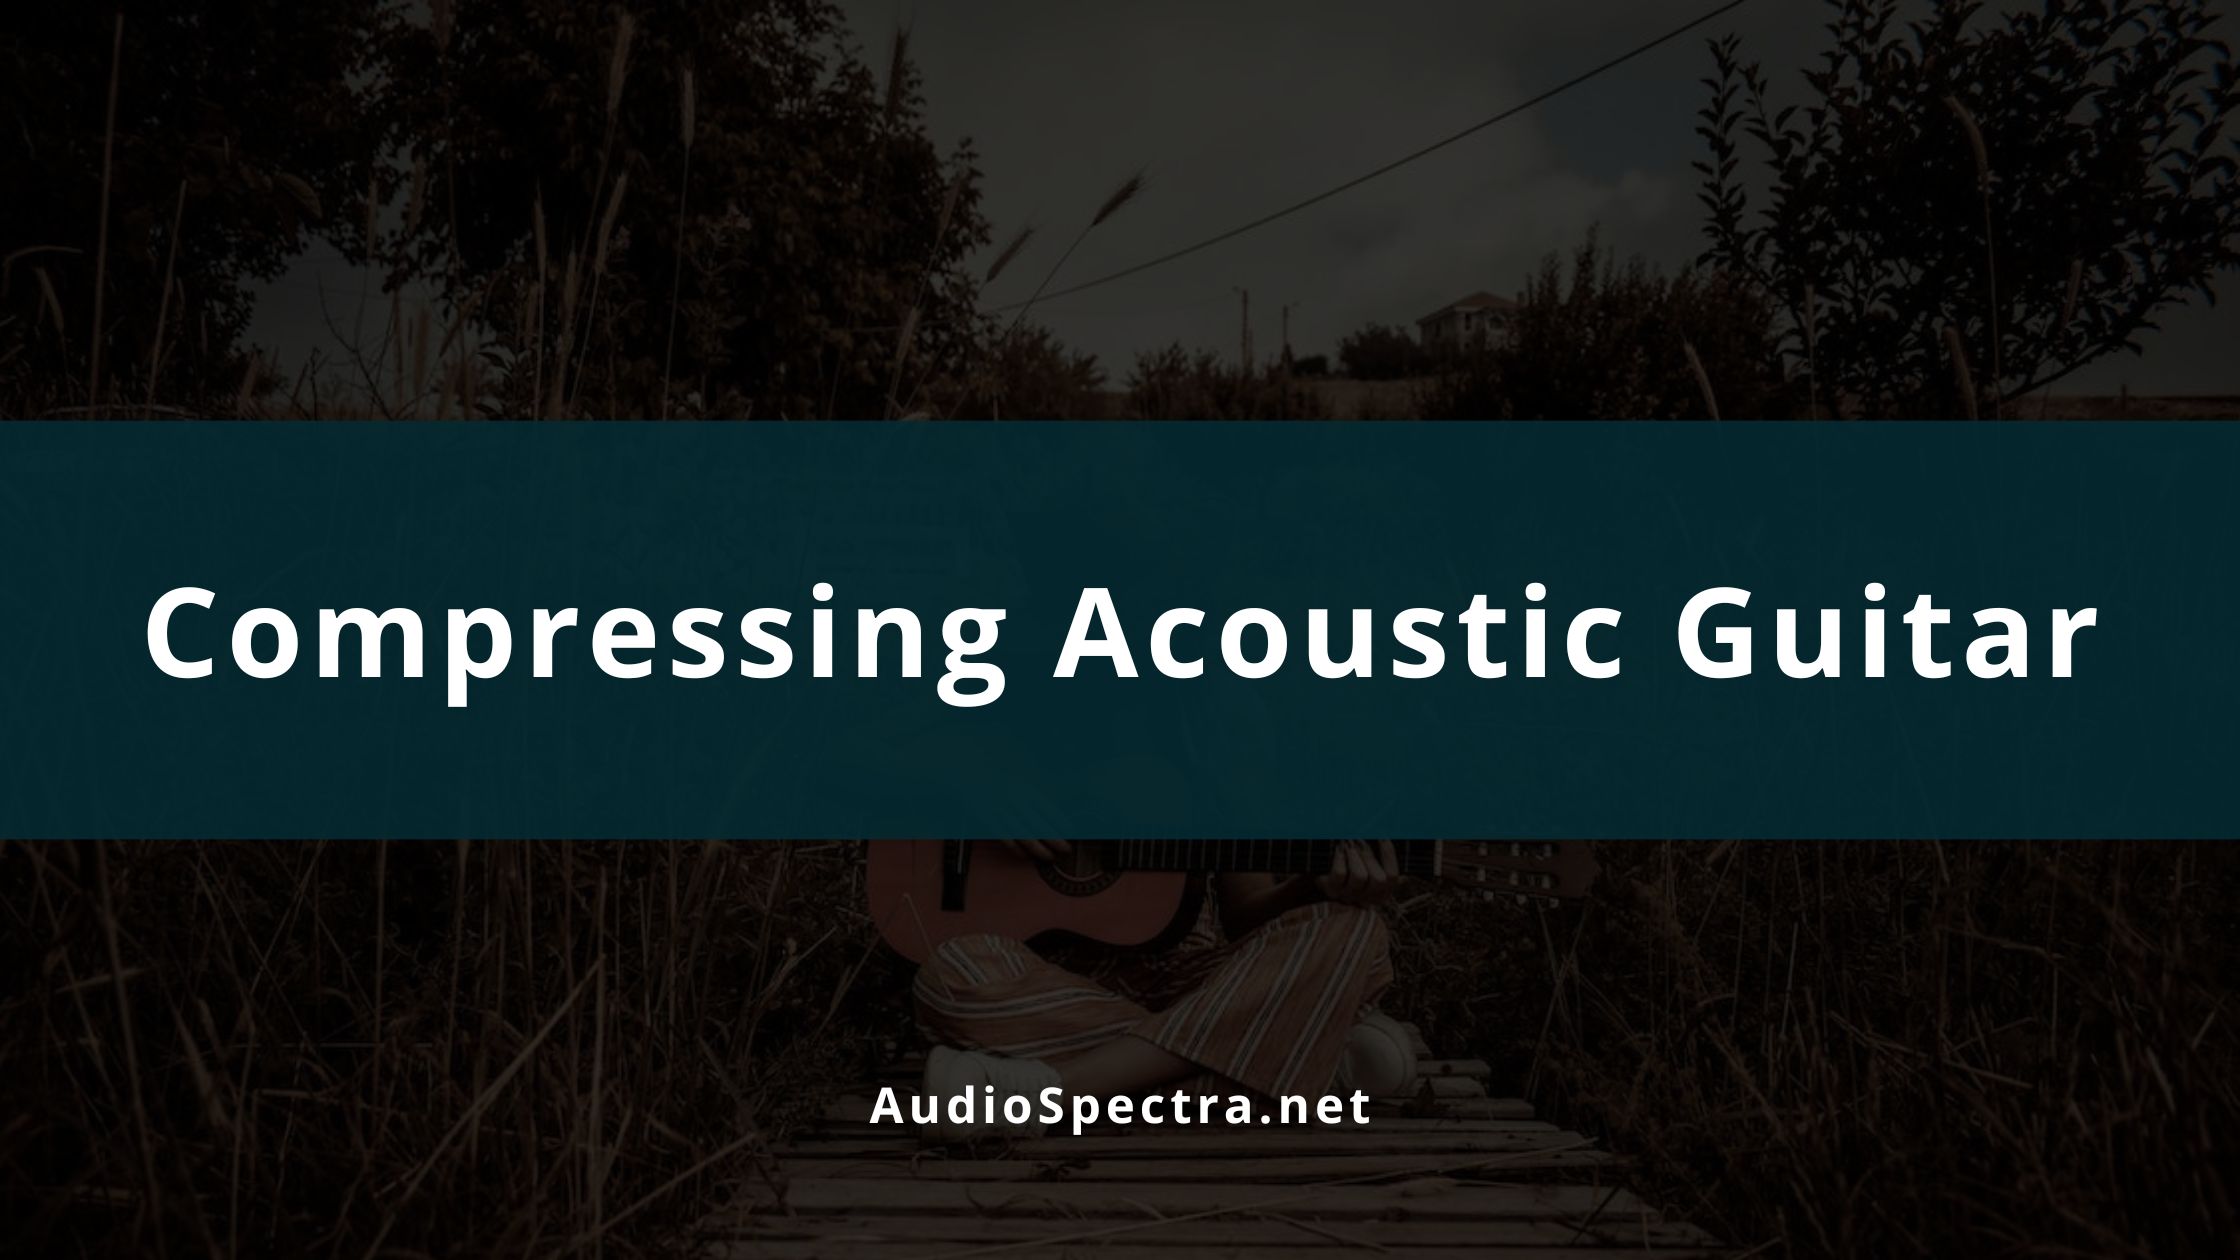 How to Compress an Acoustic Guitar